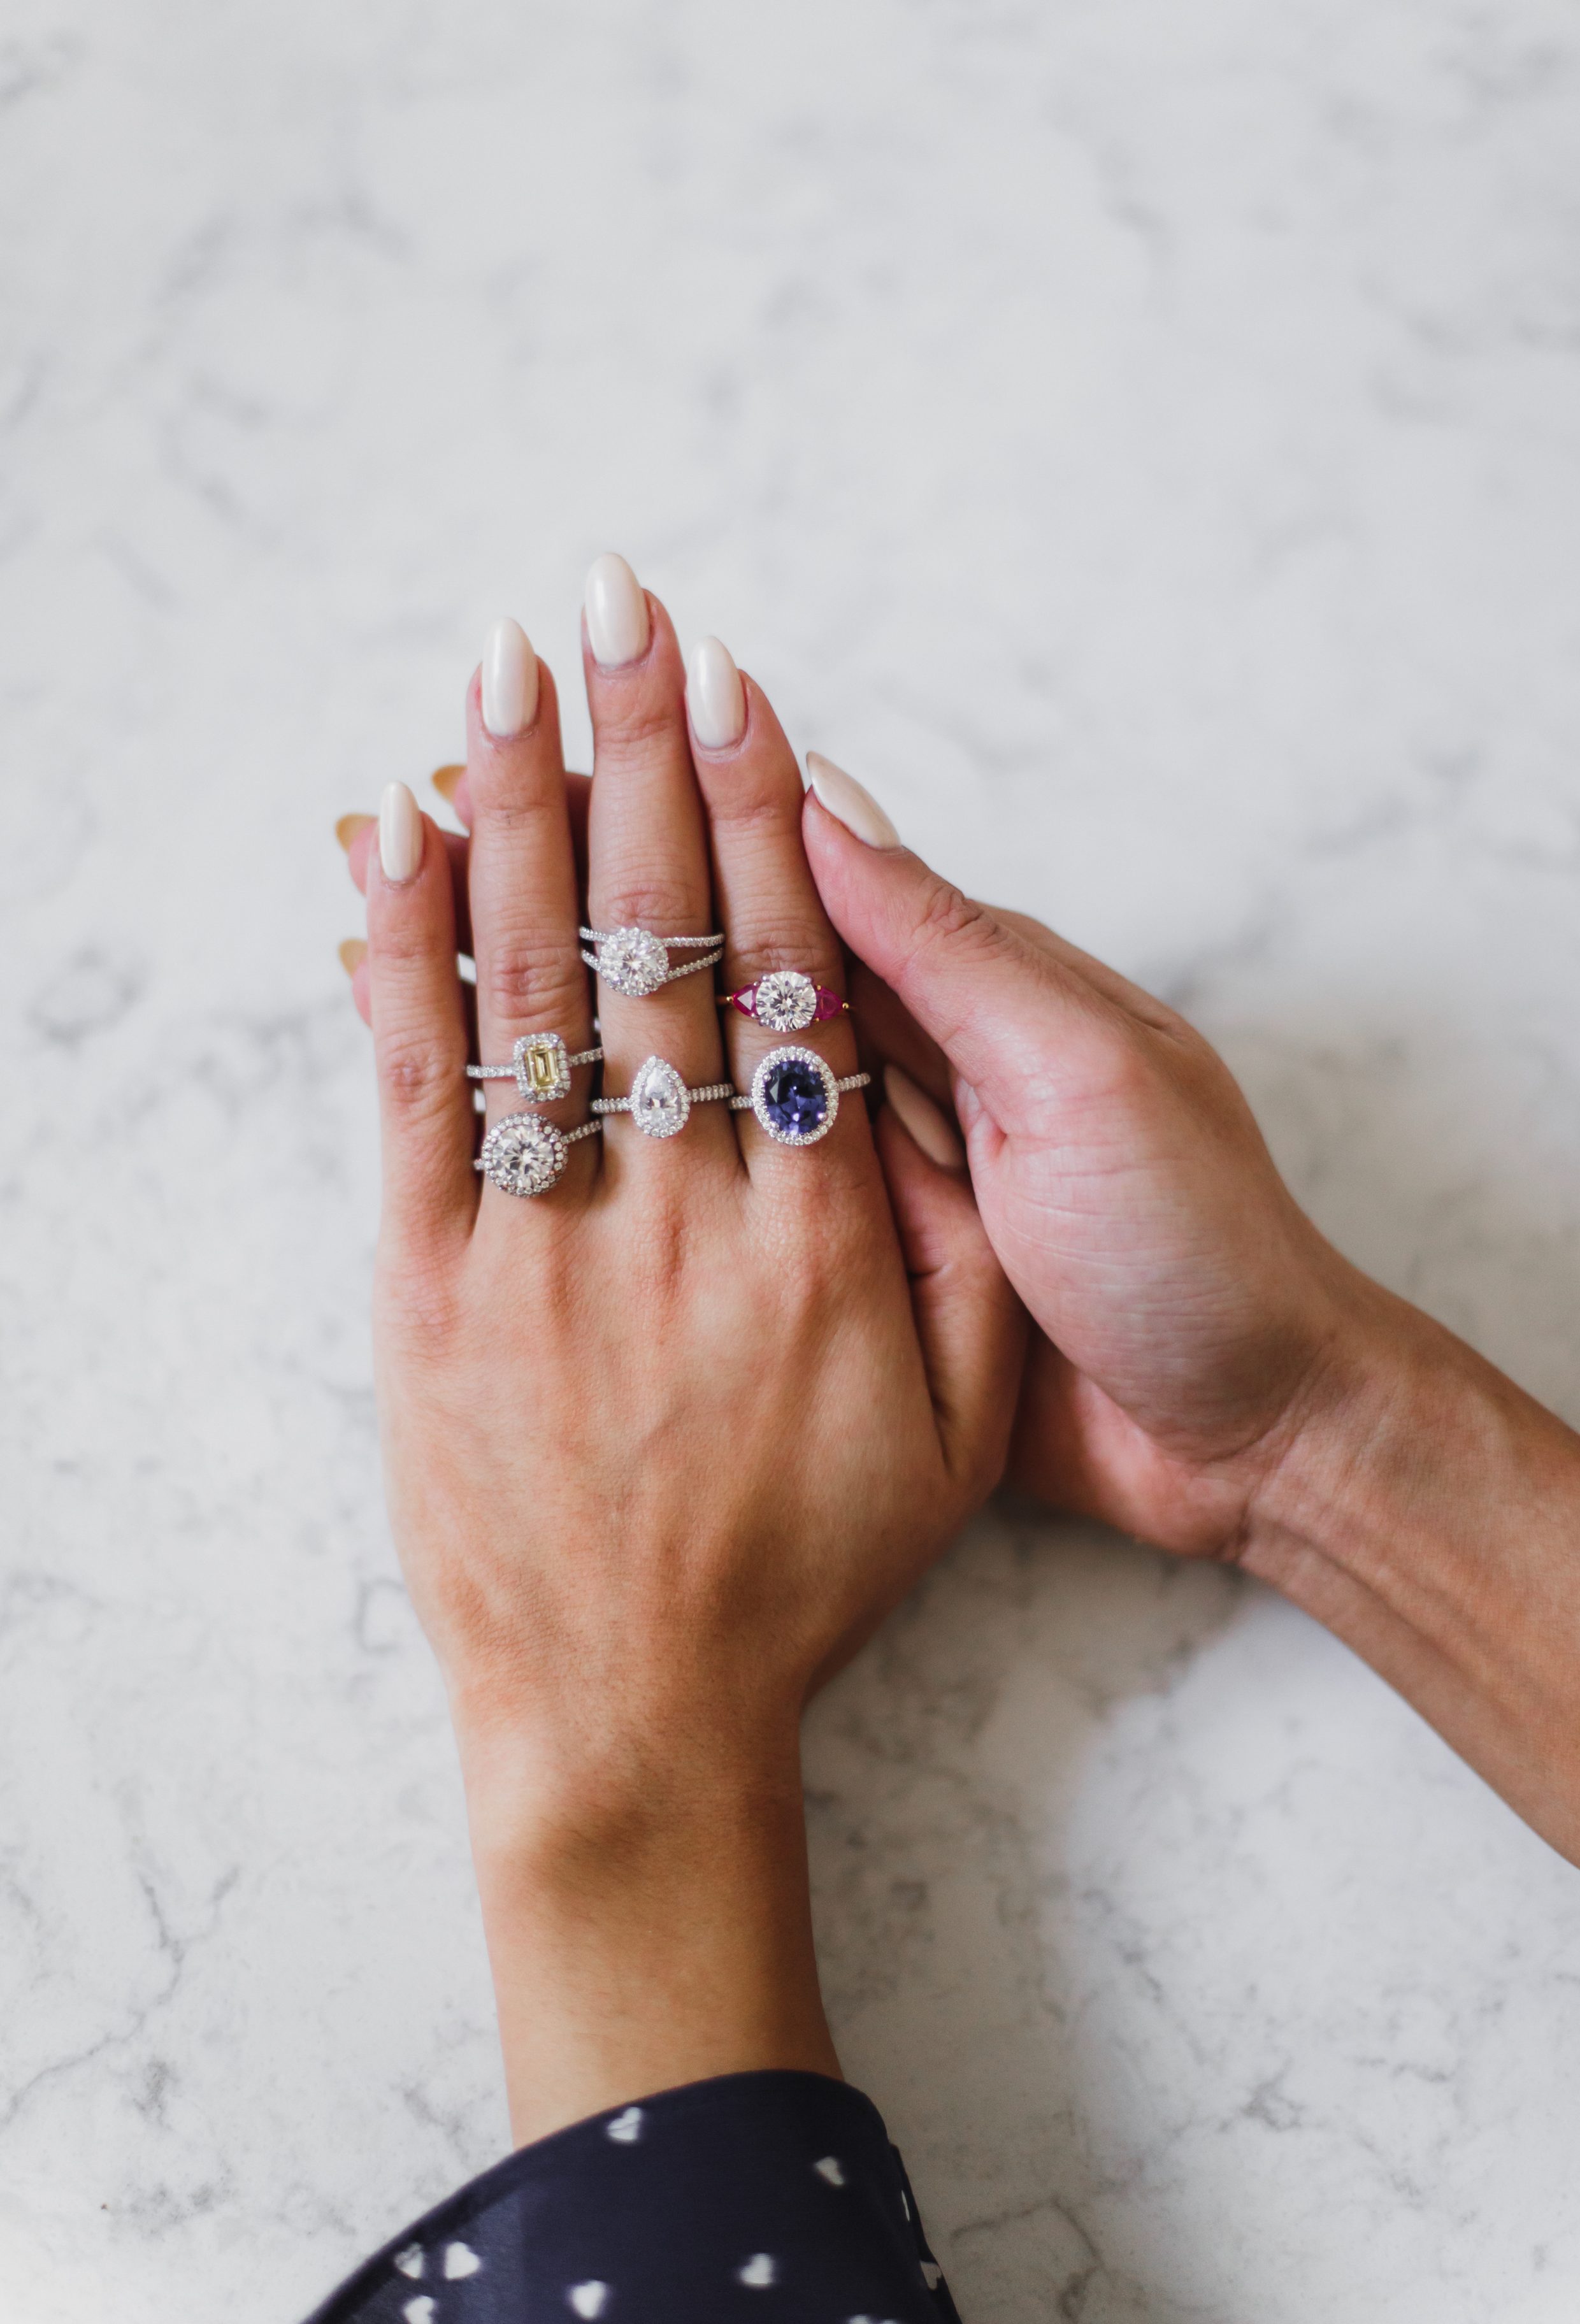 Blogger Hoang-Kim shows a variety of James Allen engagement rings for inspiration